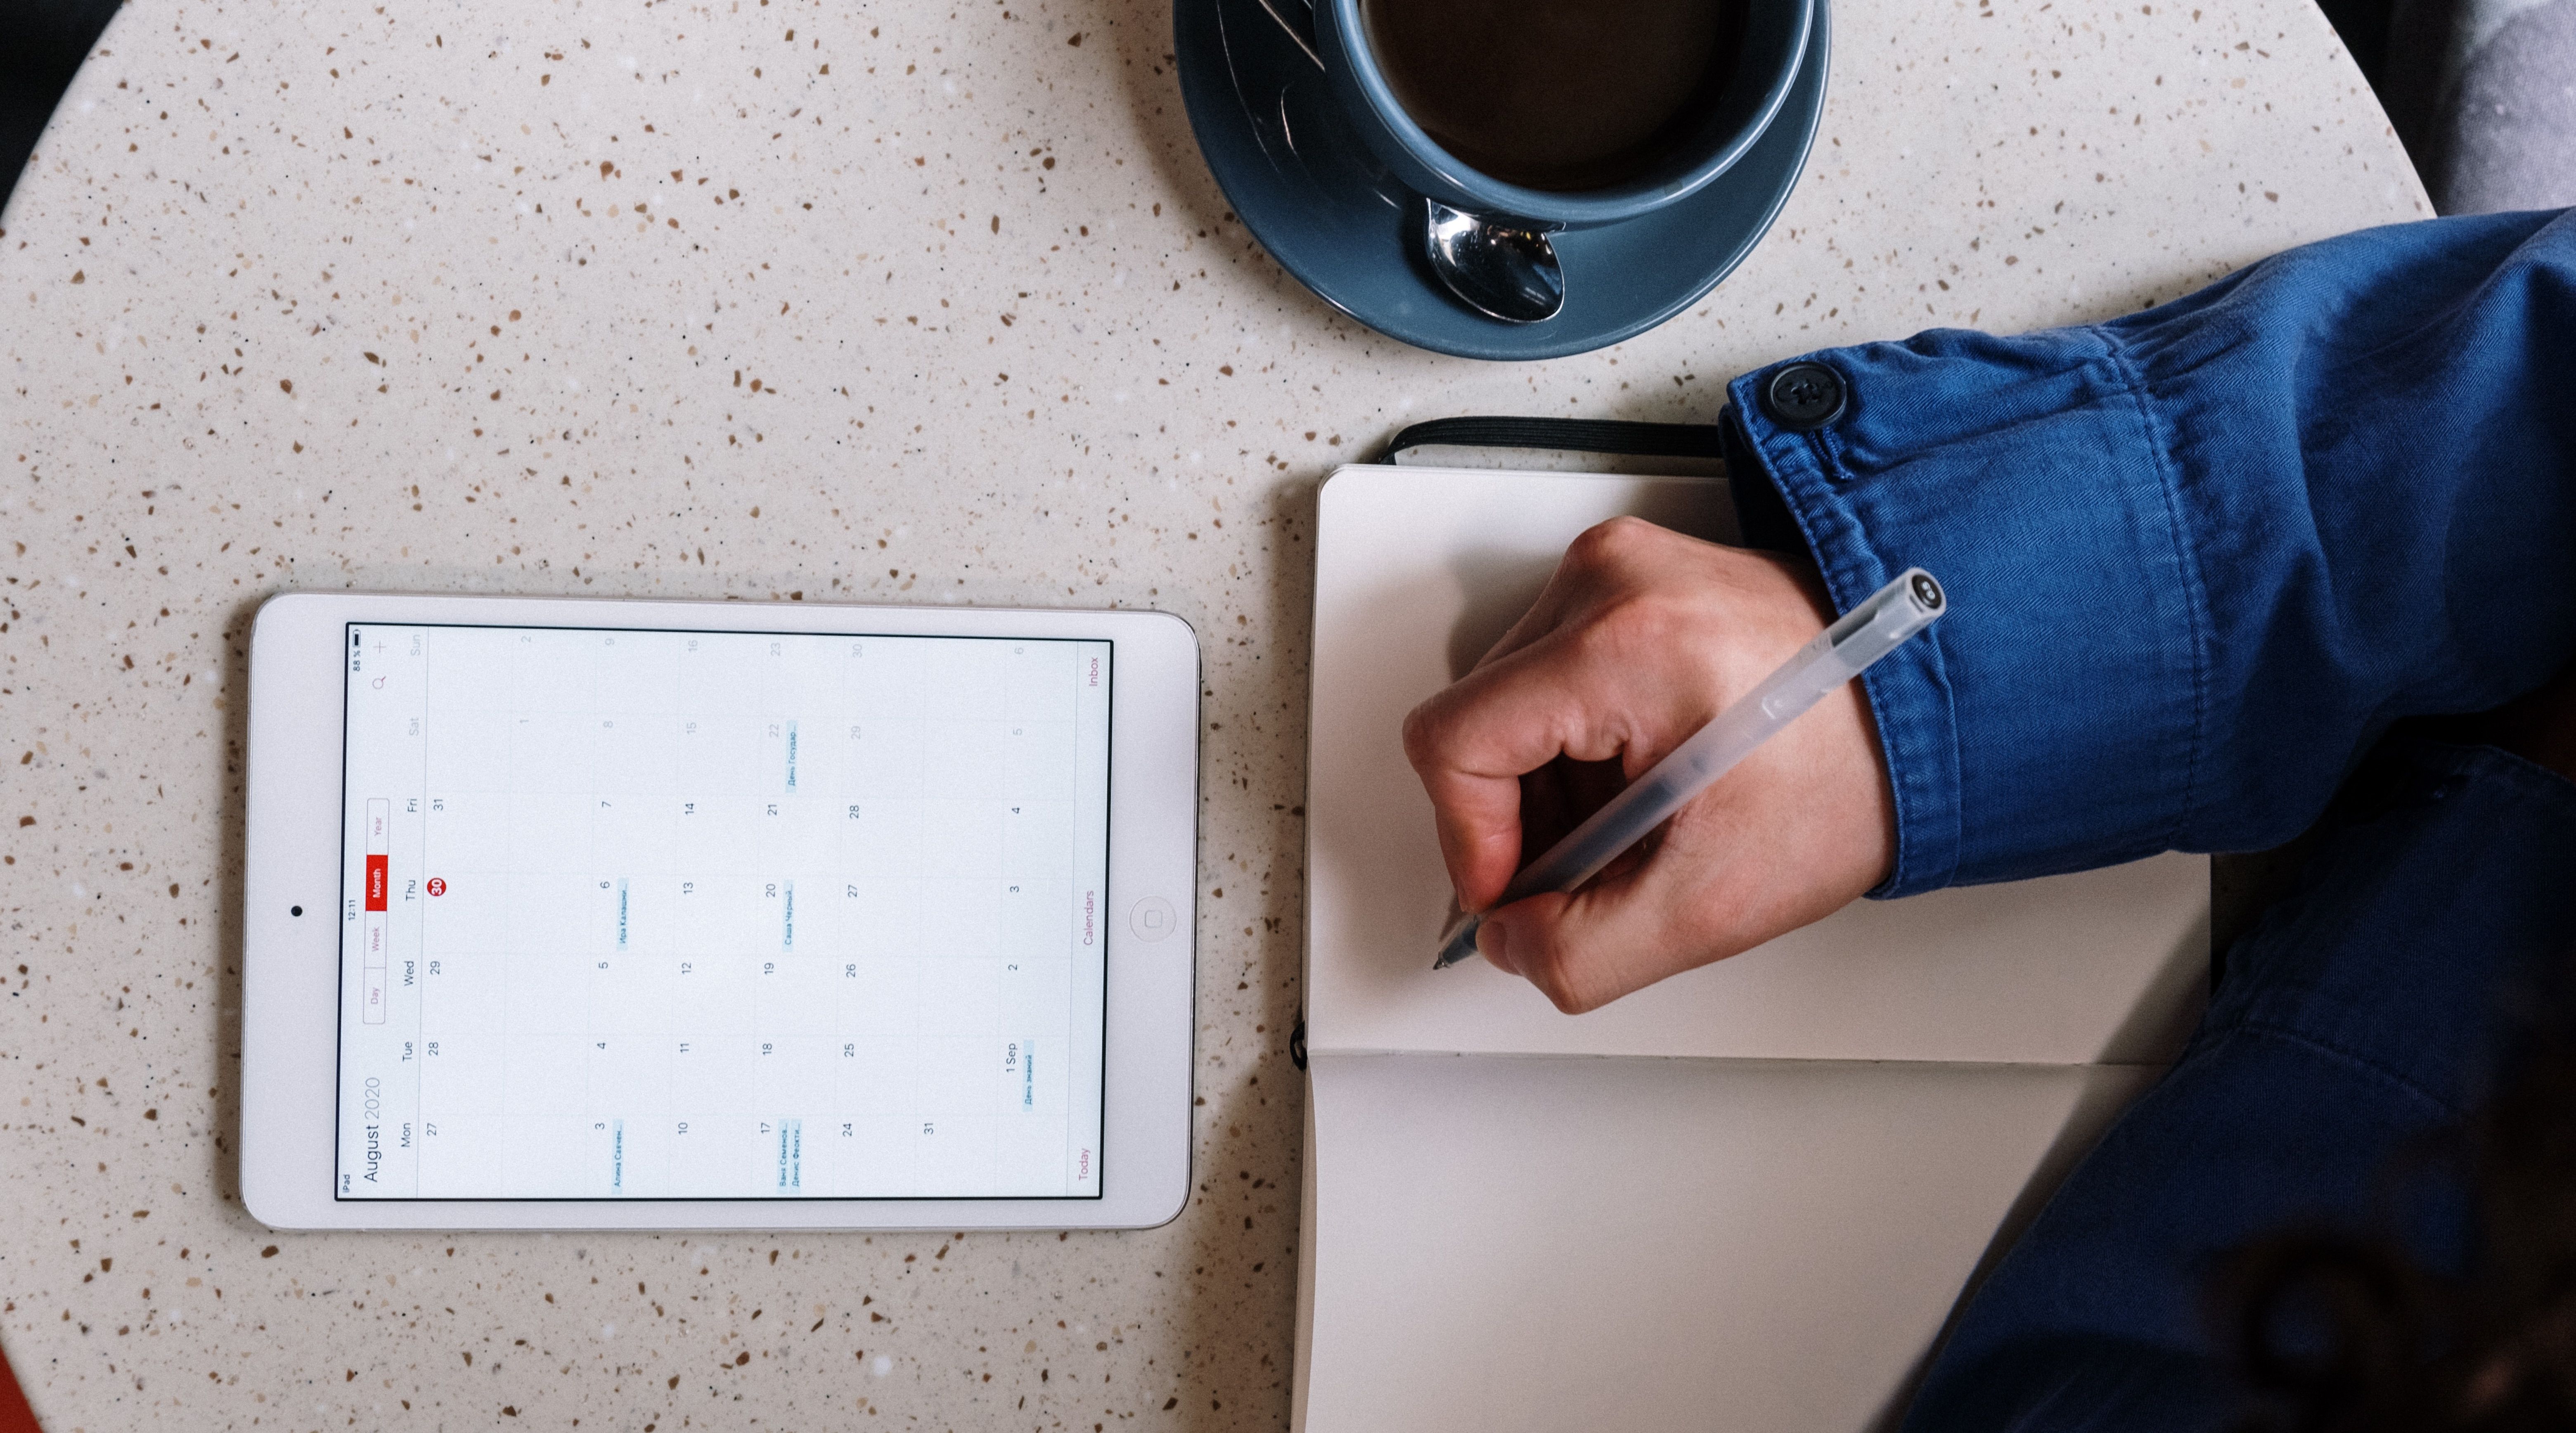 Digital calendar on table with coffee cup